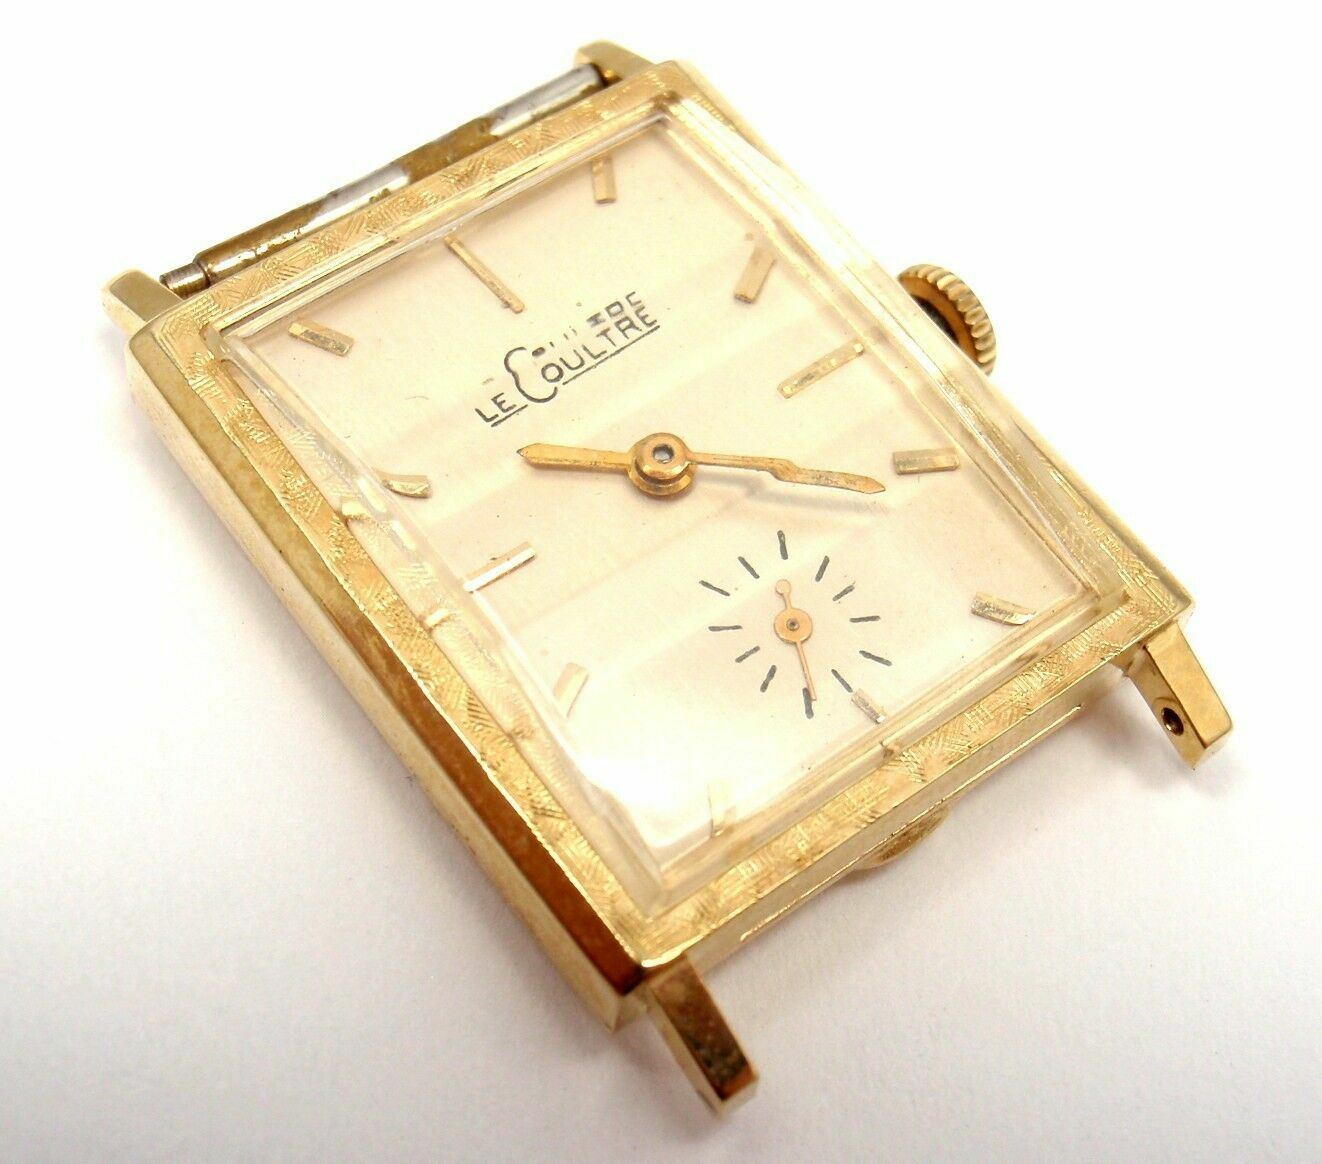 LeCoultre Jewelry & Watches:Watches, Parts & Accessories:Watches:Wristwatches VINTAGE LeCOULTRE 14K YELLOW GOLD MANUAL WIND WATCH